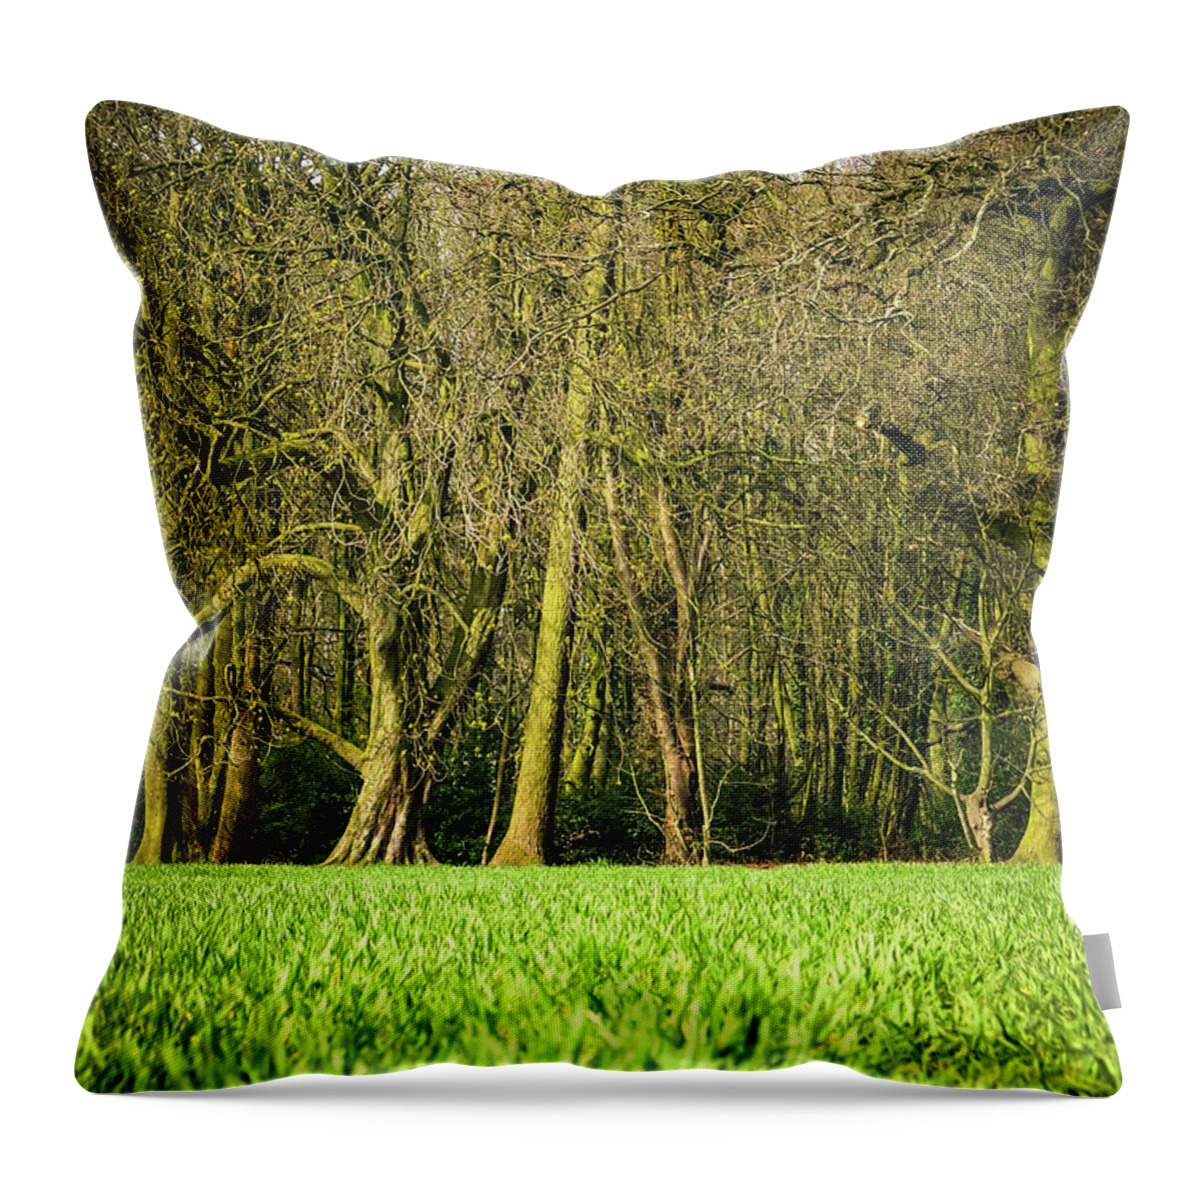 Tranquility Throw Pillow featuring the photograph Wheat Field by Nuzulu